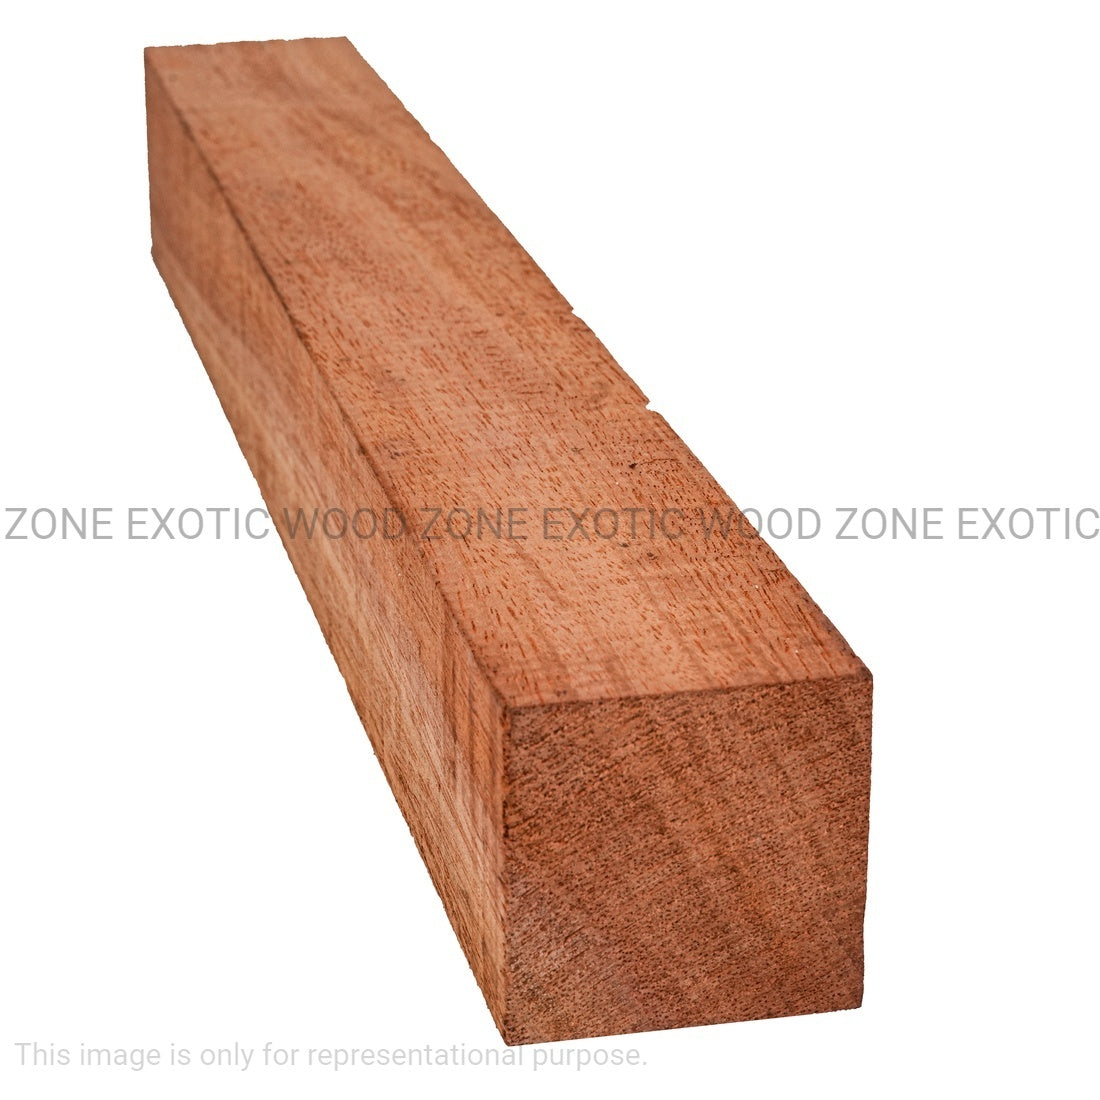 Pack of 2, African Mahogany Turning Wood Blanks 1-1/2 x 1-1/2 x 12 inches - Exotic Wood Zone - Buy online Across USA 